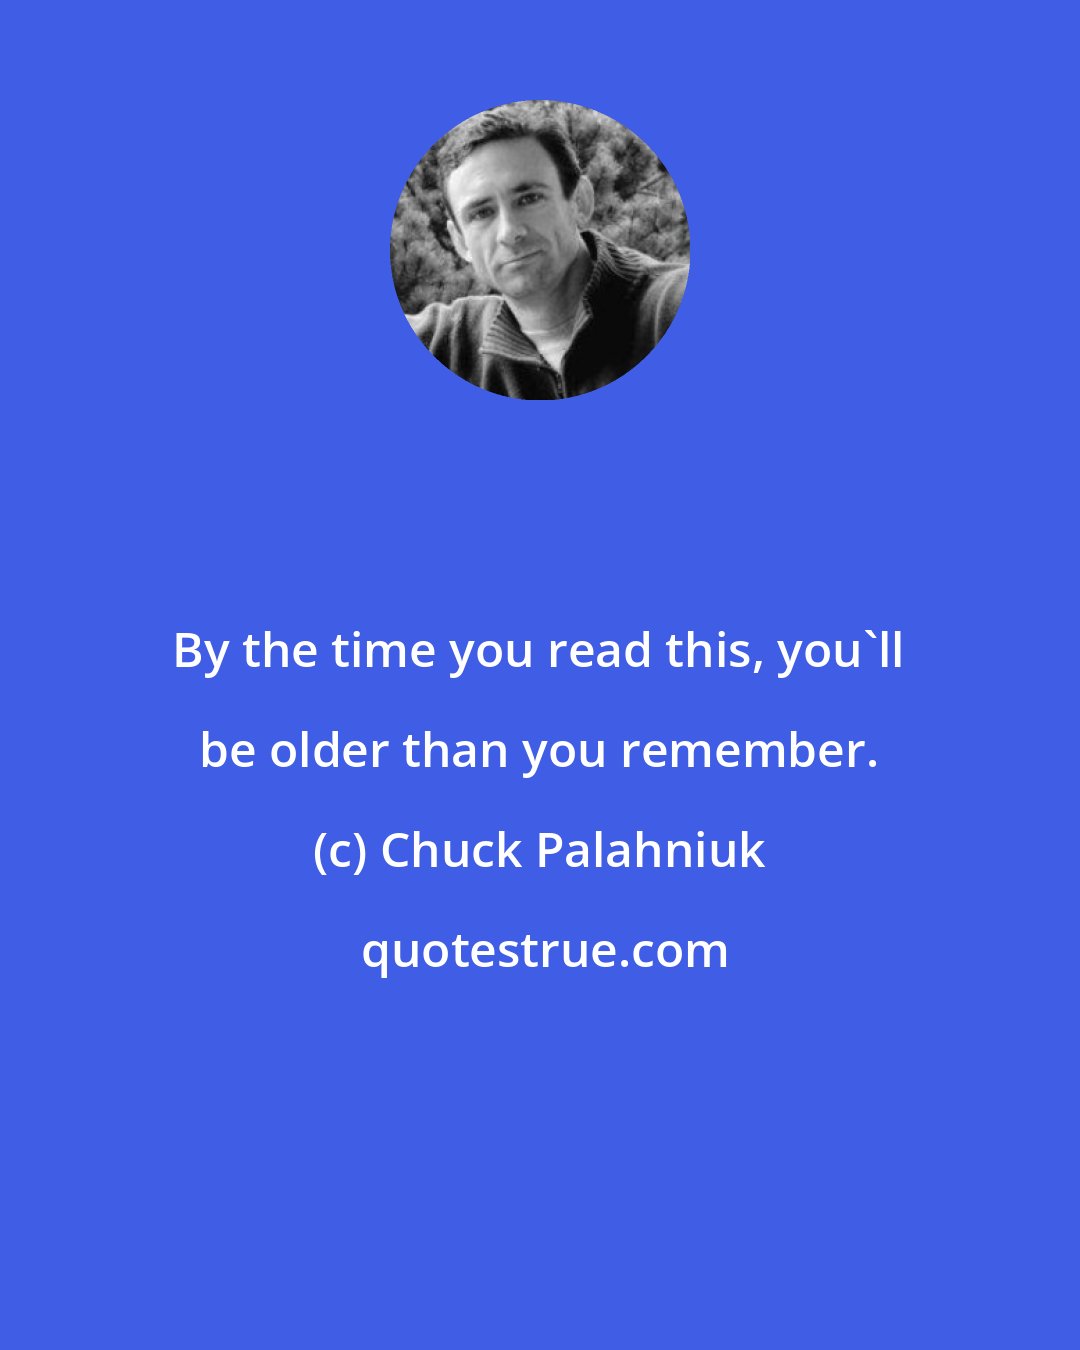 Chuck Palahniuk: By the time you read this, you'll be older than you remember.